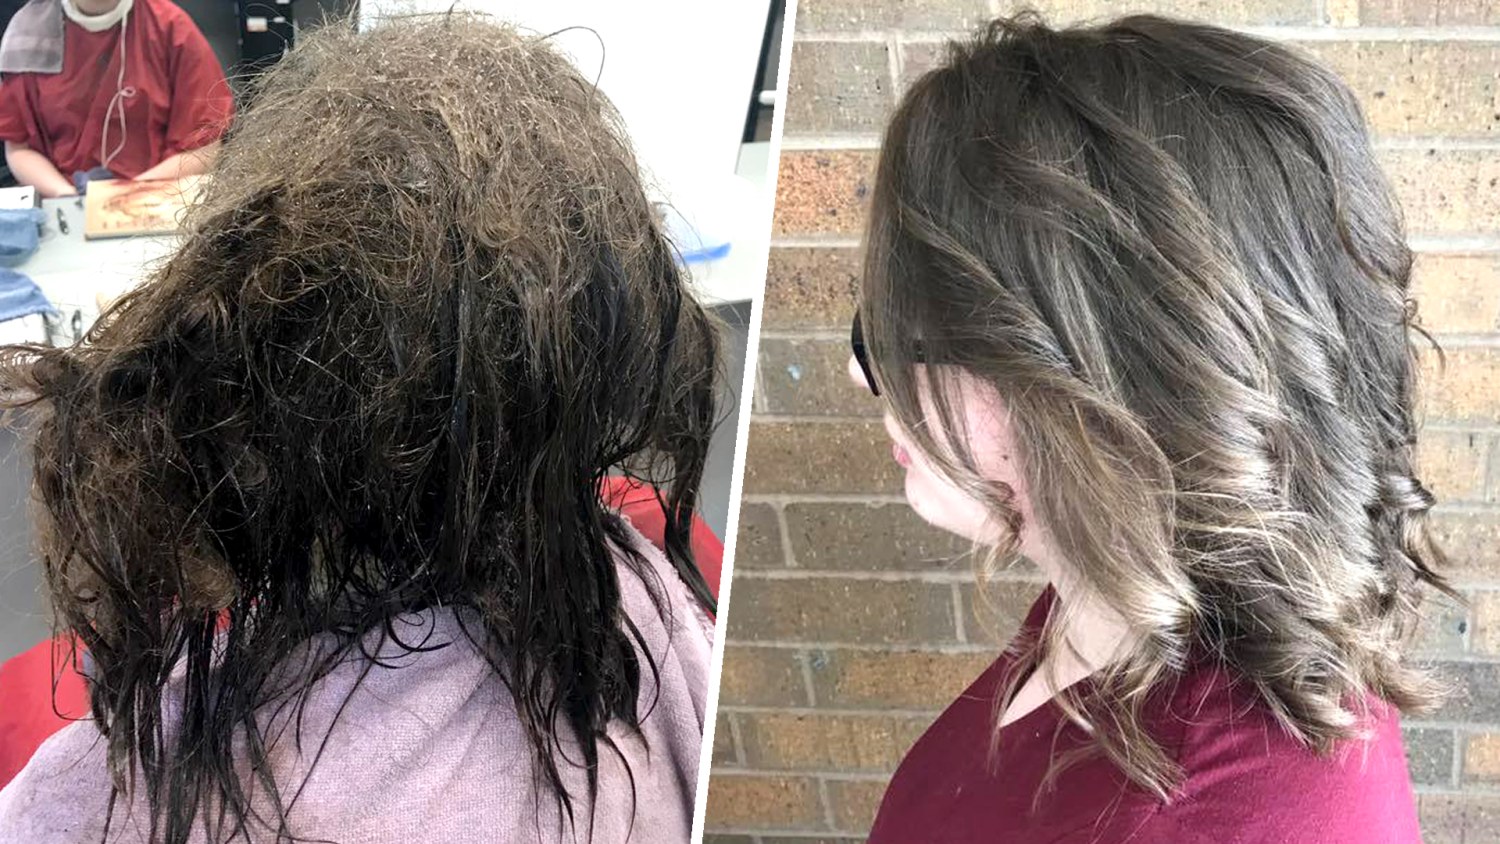 Hairstylist gives teen struggling with depression an amazing makeover